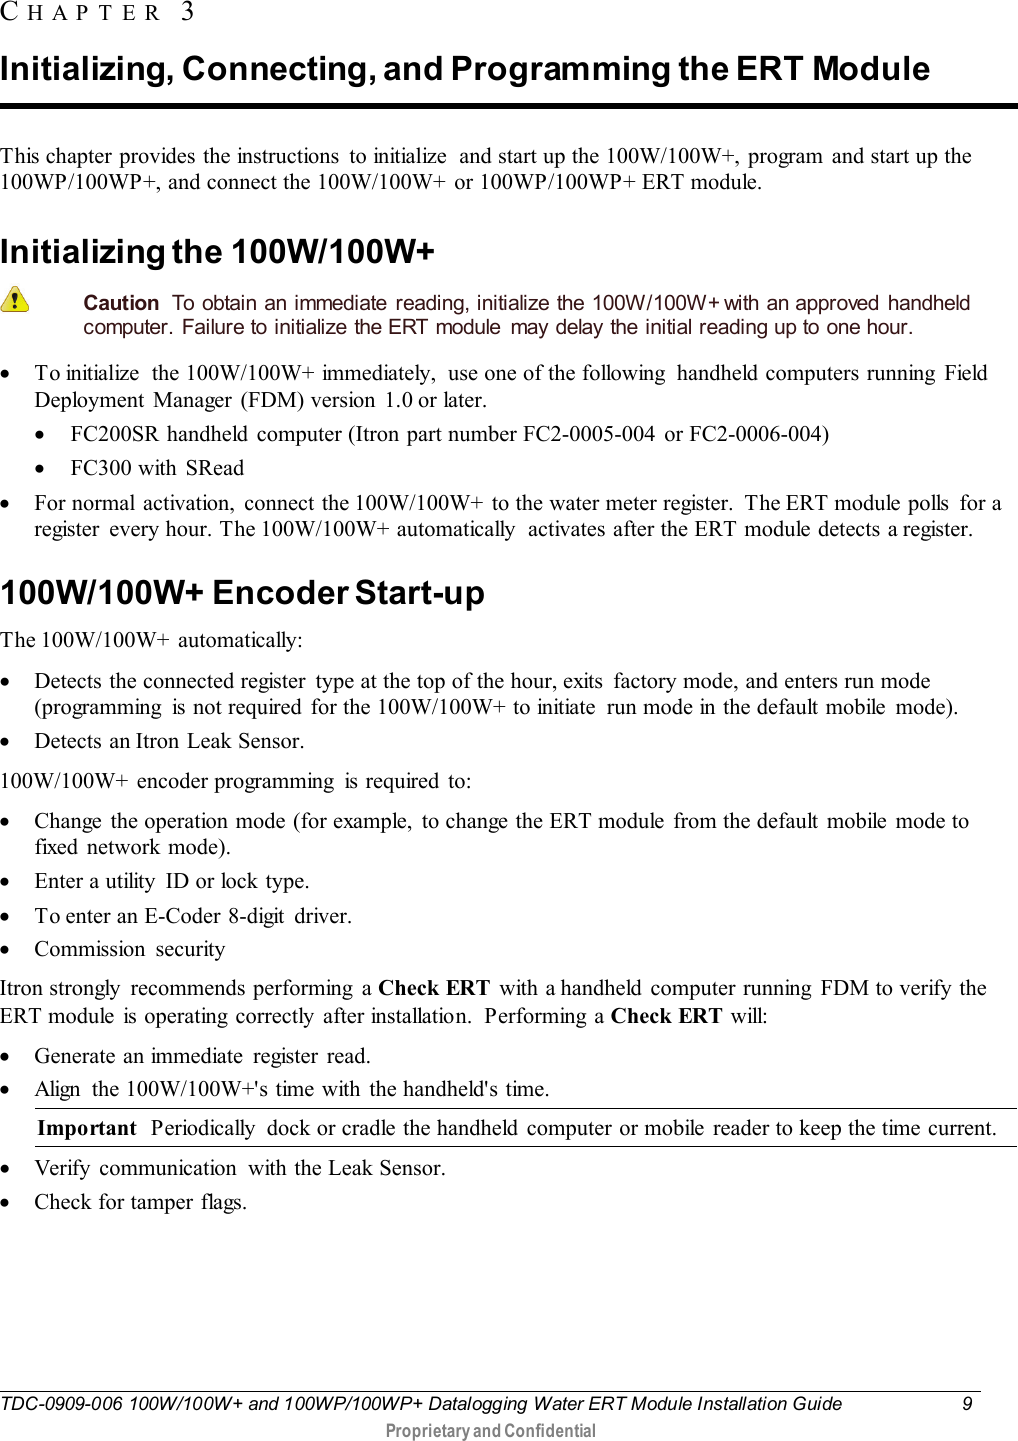  TDC-0909-006 100W/100W+ and 100WP/100WP+ Datalogging Water ERT Module Installation Guide  9   Proprietary and Confidential     This chapter provides the instructions  to initialize  and start up the 100W/100W+, program and start up the 100WP/100WP+, and connect the 100W/100W+ or 100WP/100WP+ ERT module.  Initializing the 100W/100W+   Caution  To obtain an immediate reading, initialize the 100W/100W+ with an approved handheld computer. Failure to initialize the ERT  module  may delay the initial reading up to one hour. • To initialize  the 100W/100W+ immediately,  use one of the following  handheld computers running  Field Deployment Manager (FDM) version 1.0 or later.  • FC200SR handheld  computer (Itron part number FC2-0005-004  or FC2-0006-004) • FC300 with SRead • For normal activation, connect the 100W/100W+ to the water meter register.  The ERT module polls  for a register  every hour. The 100W/100W+ automatically  activates after the ERT module detects a register.    100W/100W+ Encoder Start-up The 100W/100W+  automatically: • Detects the connected register  type at the top of the hour, exits  factory mode, and enters run mode (programming  is not required  for the 100W/100W+ to initiate  run mode in the default mobile  mode).  • Detects an Itron Leak Sensor. 100W/100W+ encoder programming  is required to:  • Change the operation mode (for example,  to change the ERT module  from the default mobile mode to fixed network mode). • Enter a utility  ID or lock type. • To enter an E-Coder 8-digit driver. • Commission security Itron strongly recommends performing a Check ERT  with a handheld computer running  FDM to verify the ERT module is operating correctly after installation. Performing a Check ERT will: • Generate an immediate  register  read. • Align  the 100W/100W+&apos;s time with the handheld&apos;s time. Important  Periodically  dock or cradle the handheld  computer or mobile  reader to keep the time current. • Verify  communication  with the Leak Sensor. • Check for tamper flags.  CHAPTER 3  Initializing, Connecting, and Programming the ERT Module 